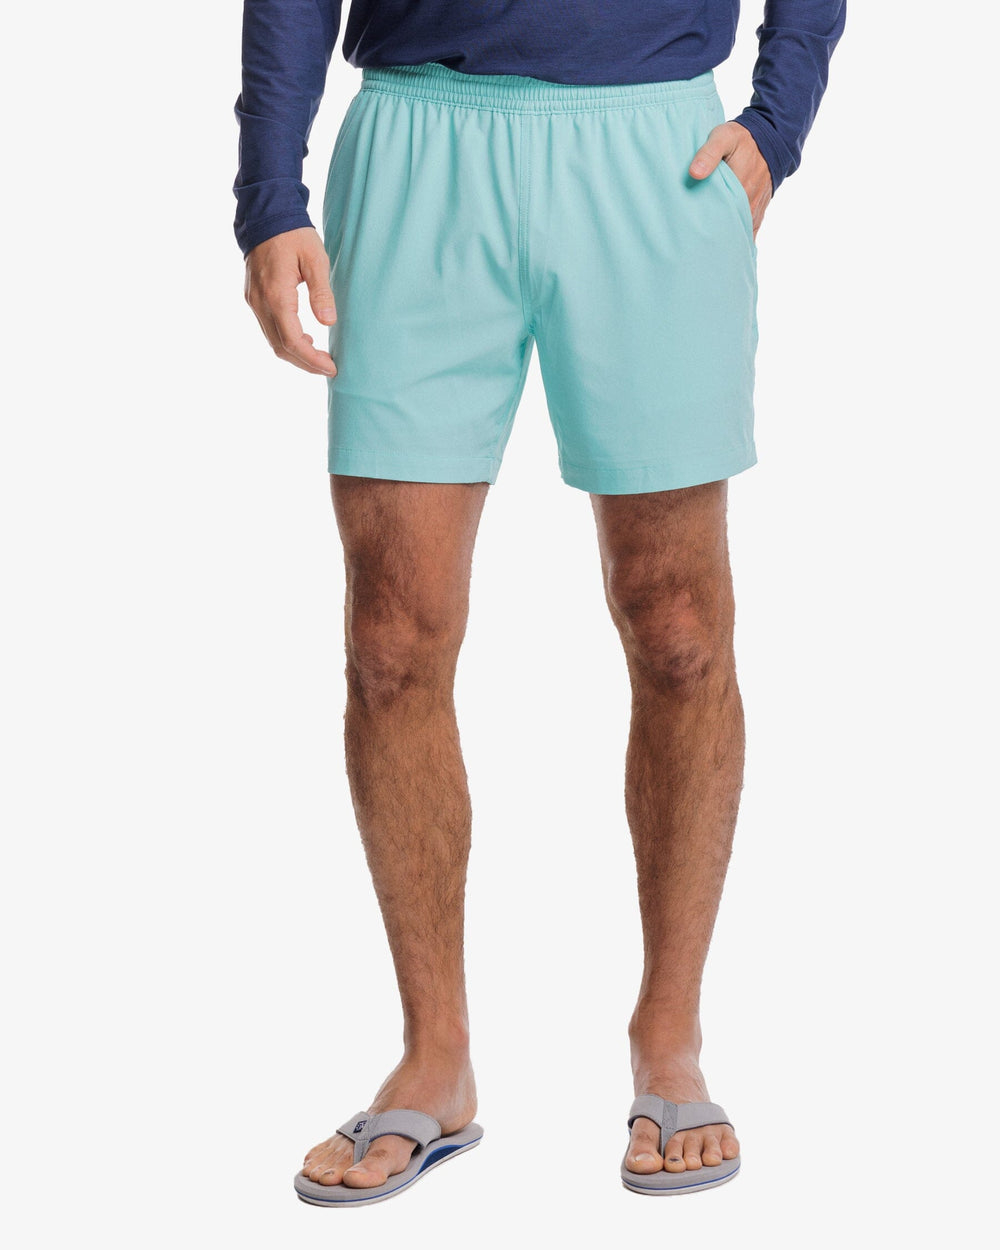 The model front view of the Men's Rip Channel 6 Inch Performance Short by Southern Tide - Mint